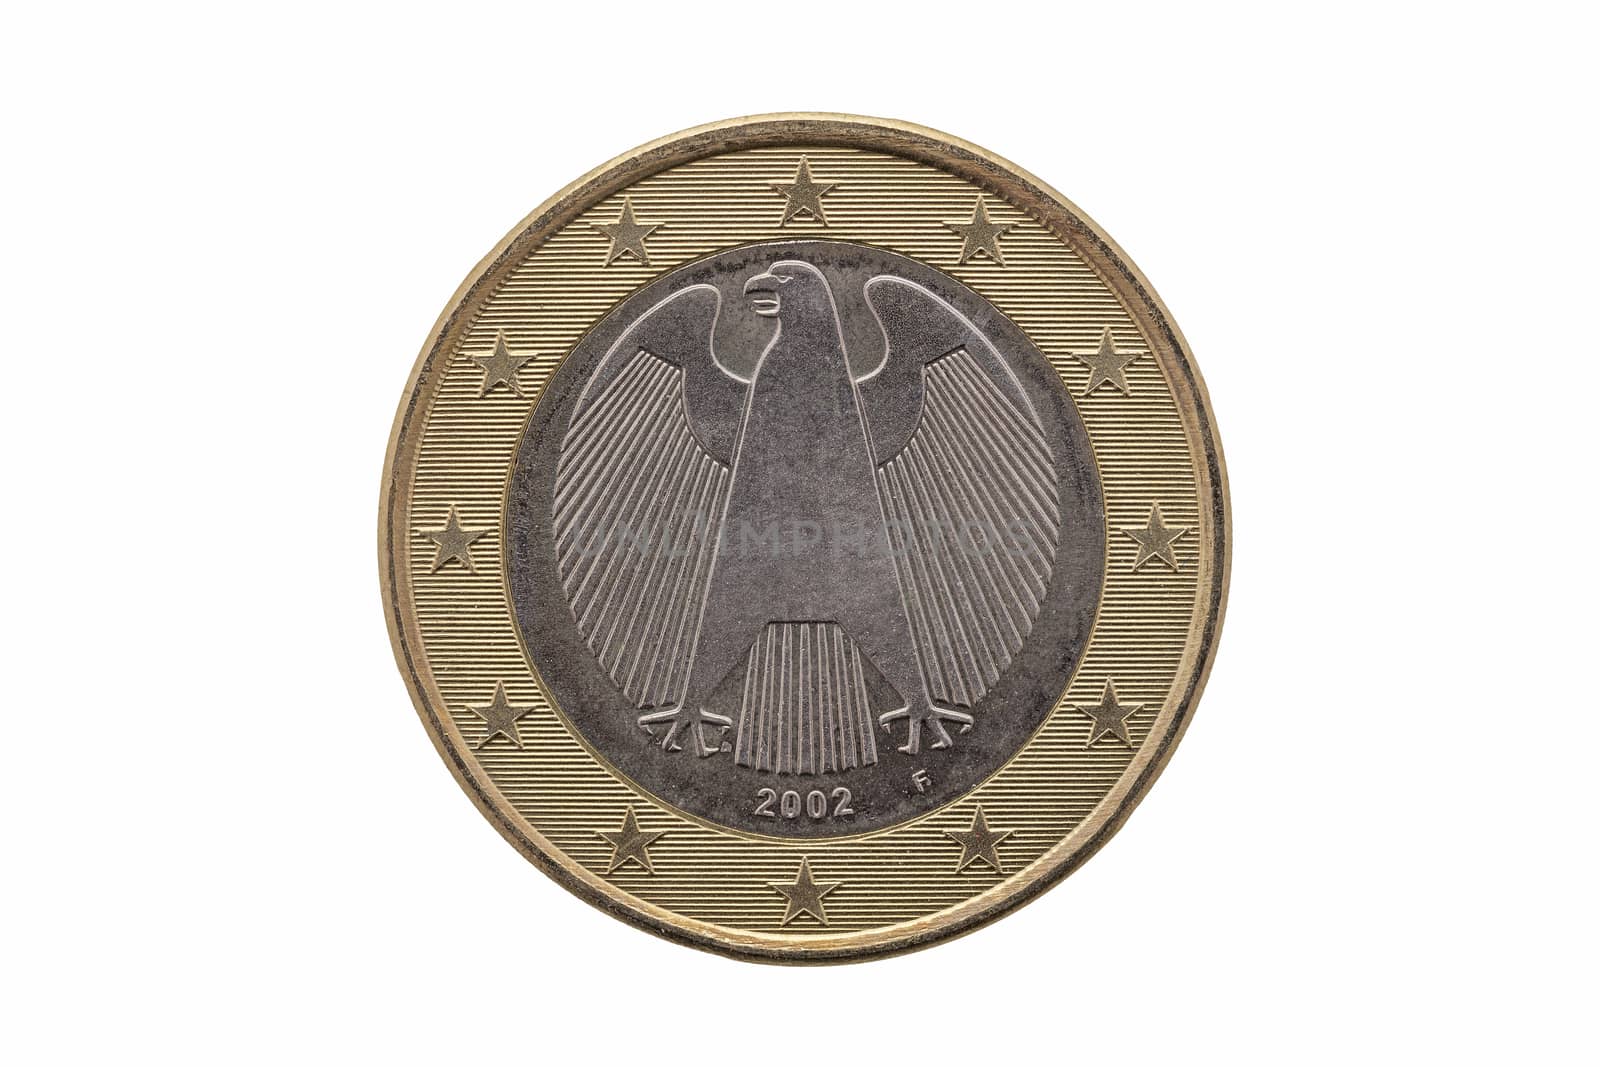 Reverse side of a One Euro coin of Germany by ant